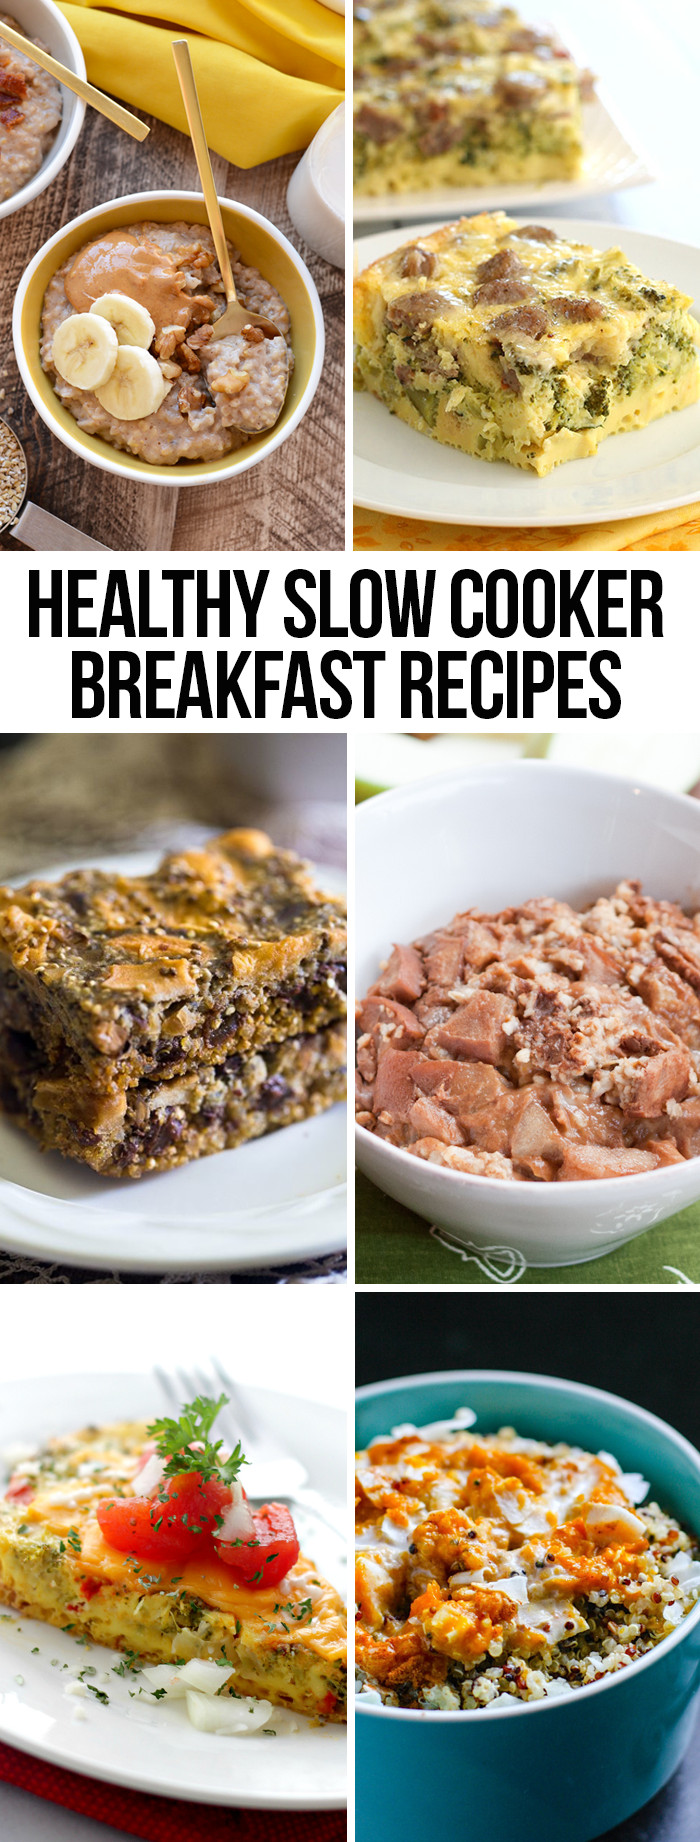 Slow Cooker Recipes Healthy
 Healthy Slow Cooker Breakfast Recipes